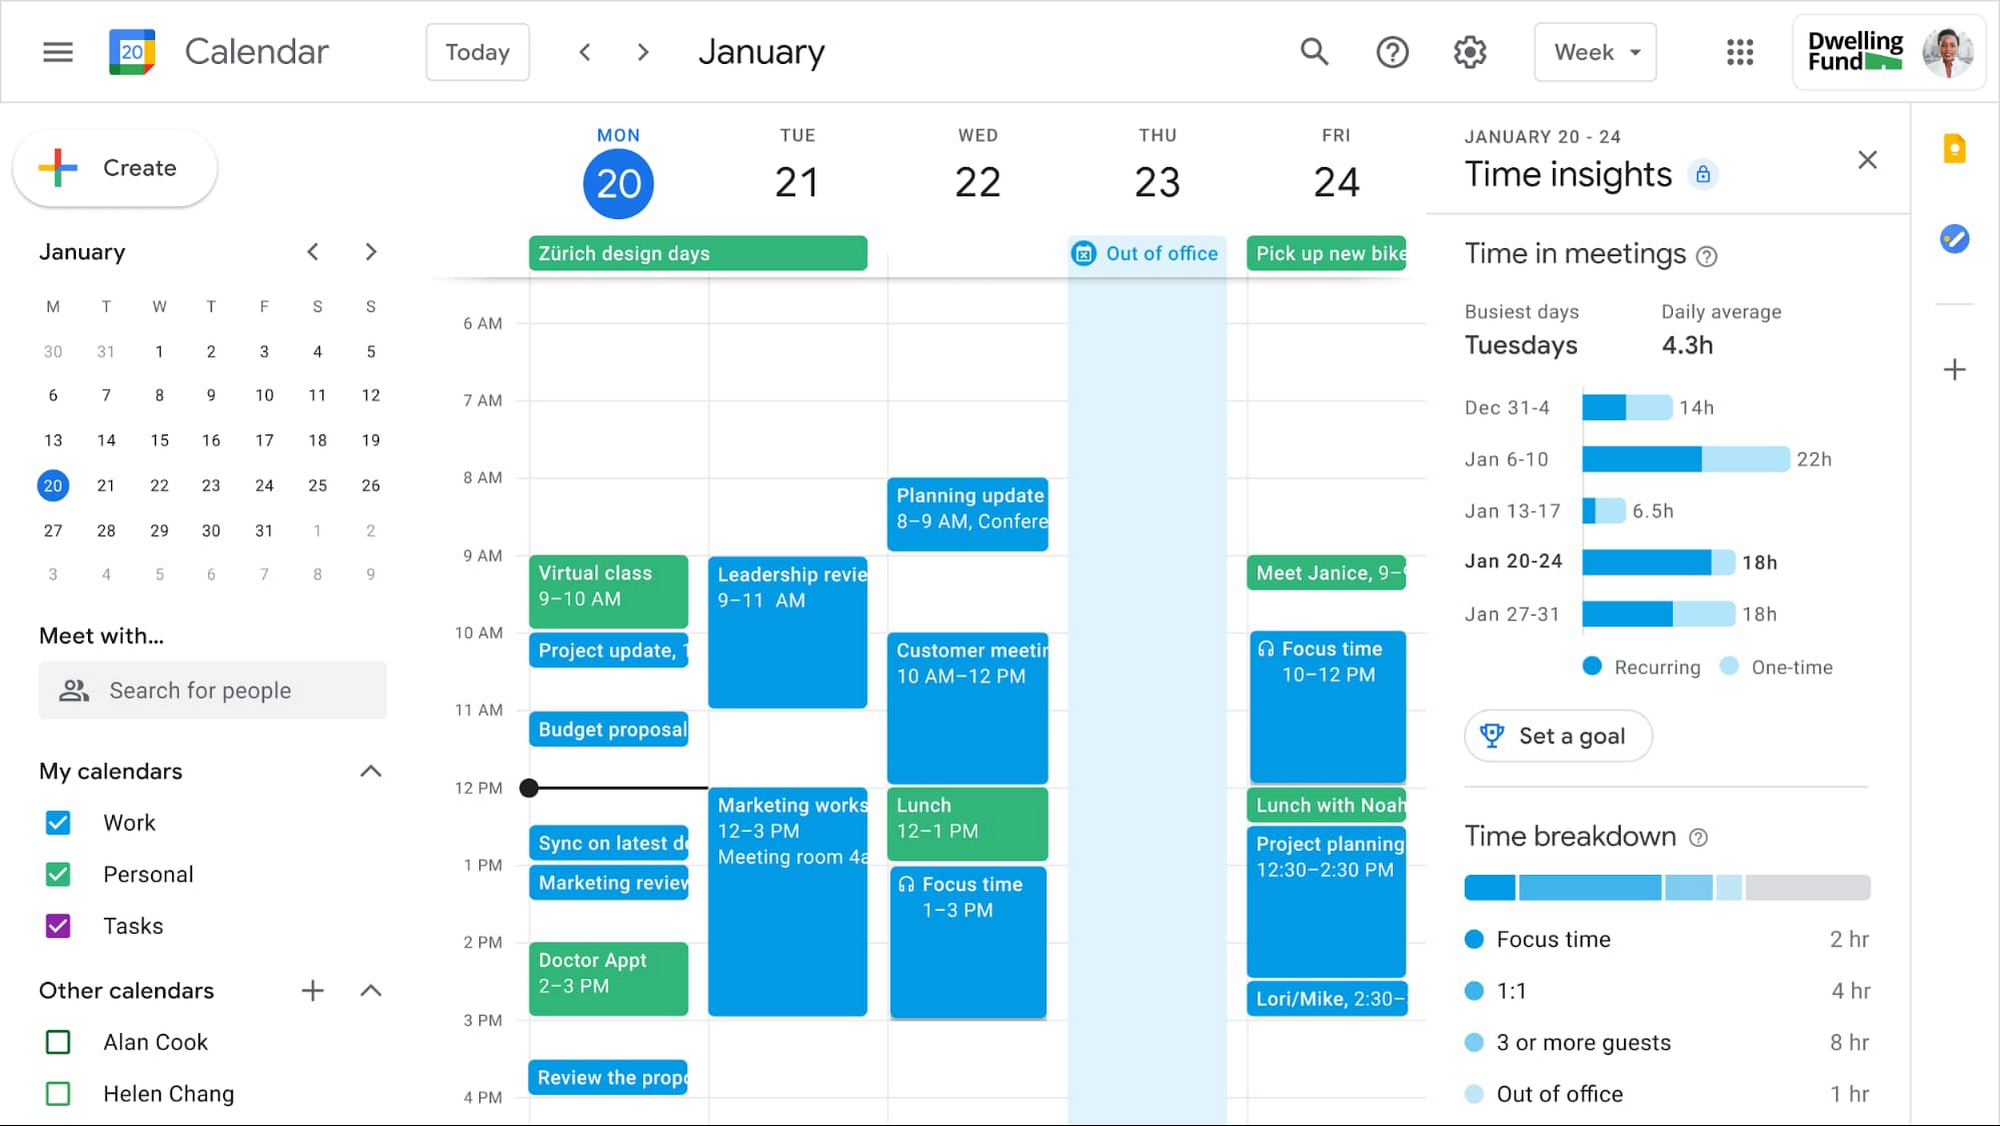 Google Workspace calendar showing workers' time insights